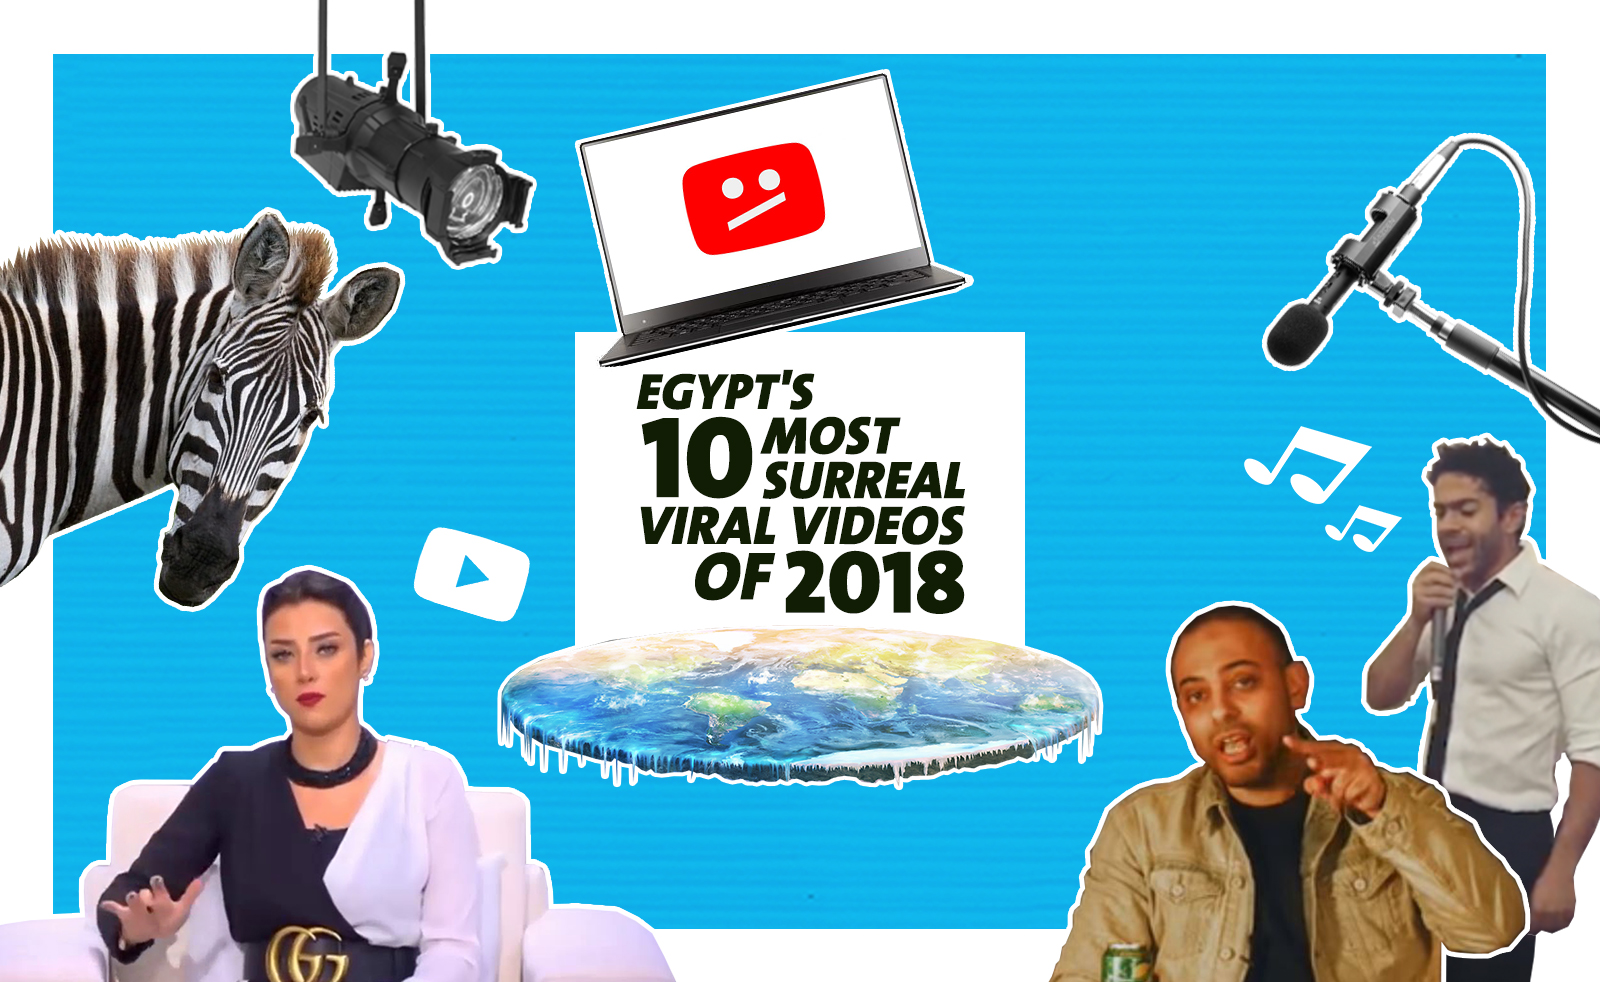 Egypt's 10 Most Surreal Viral Videos of 2018